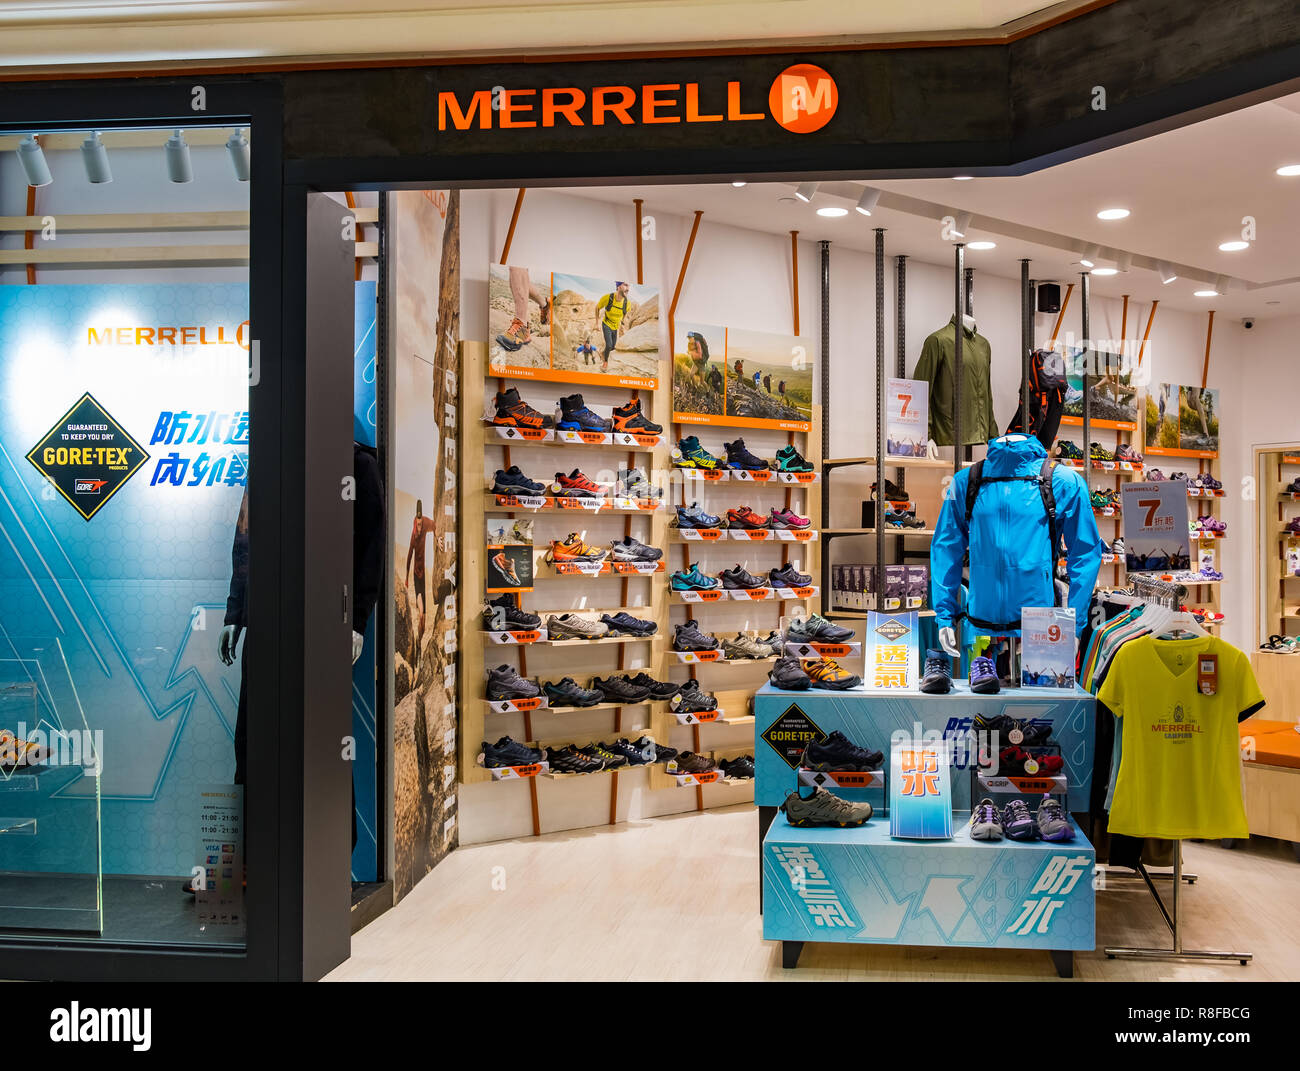 merrell clothing outlet